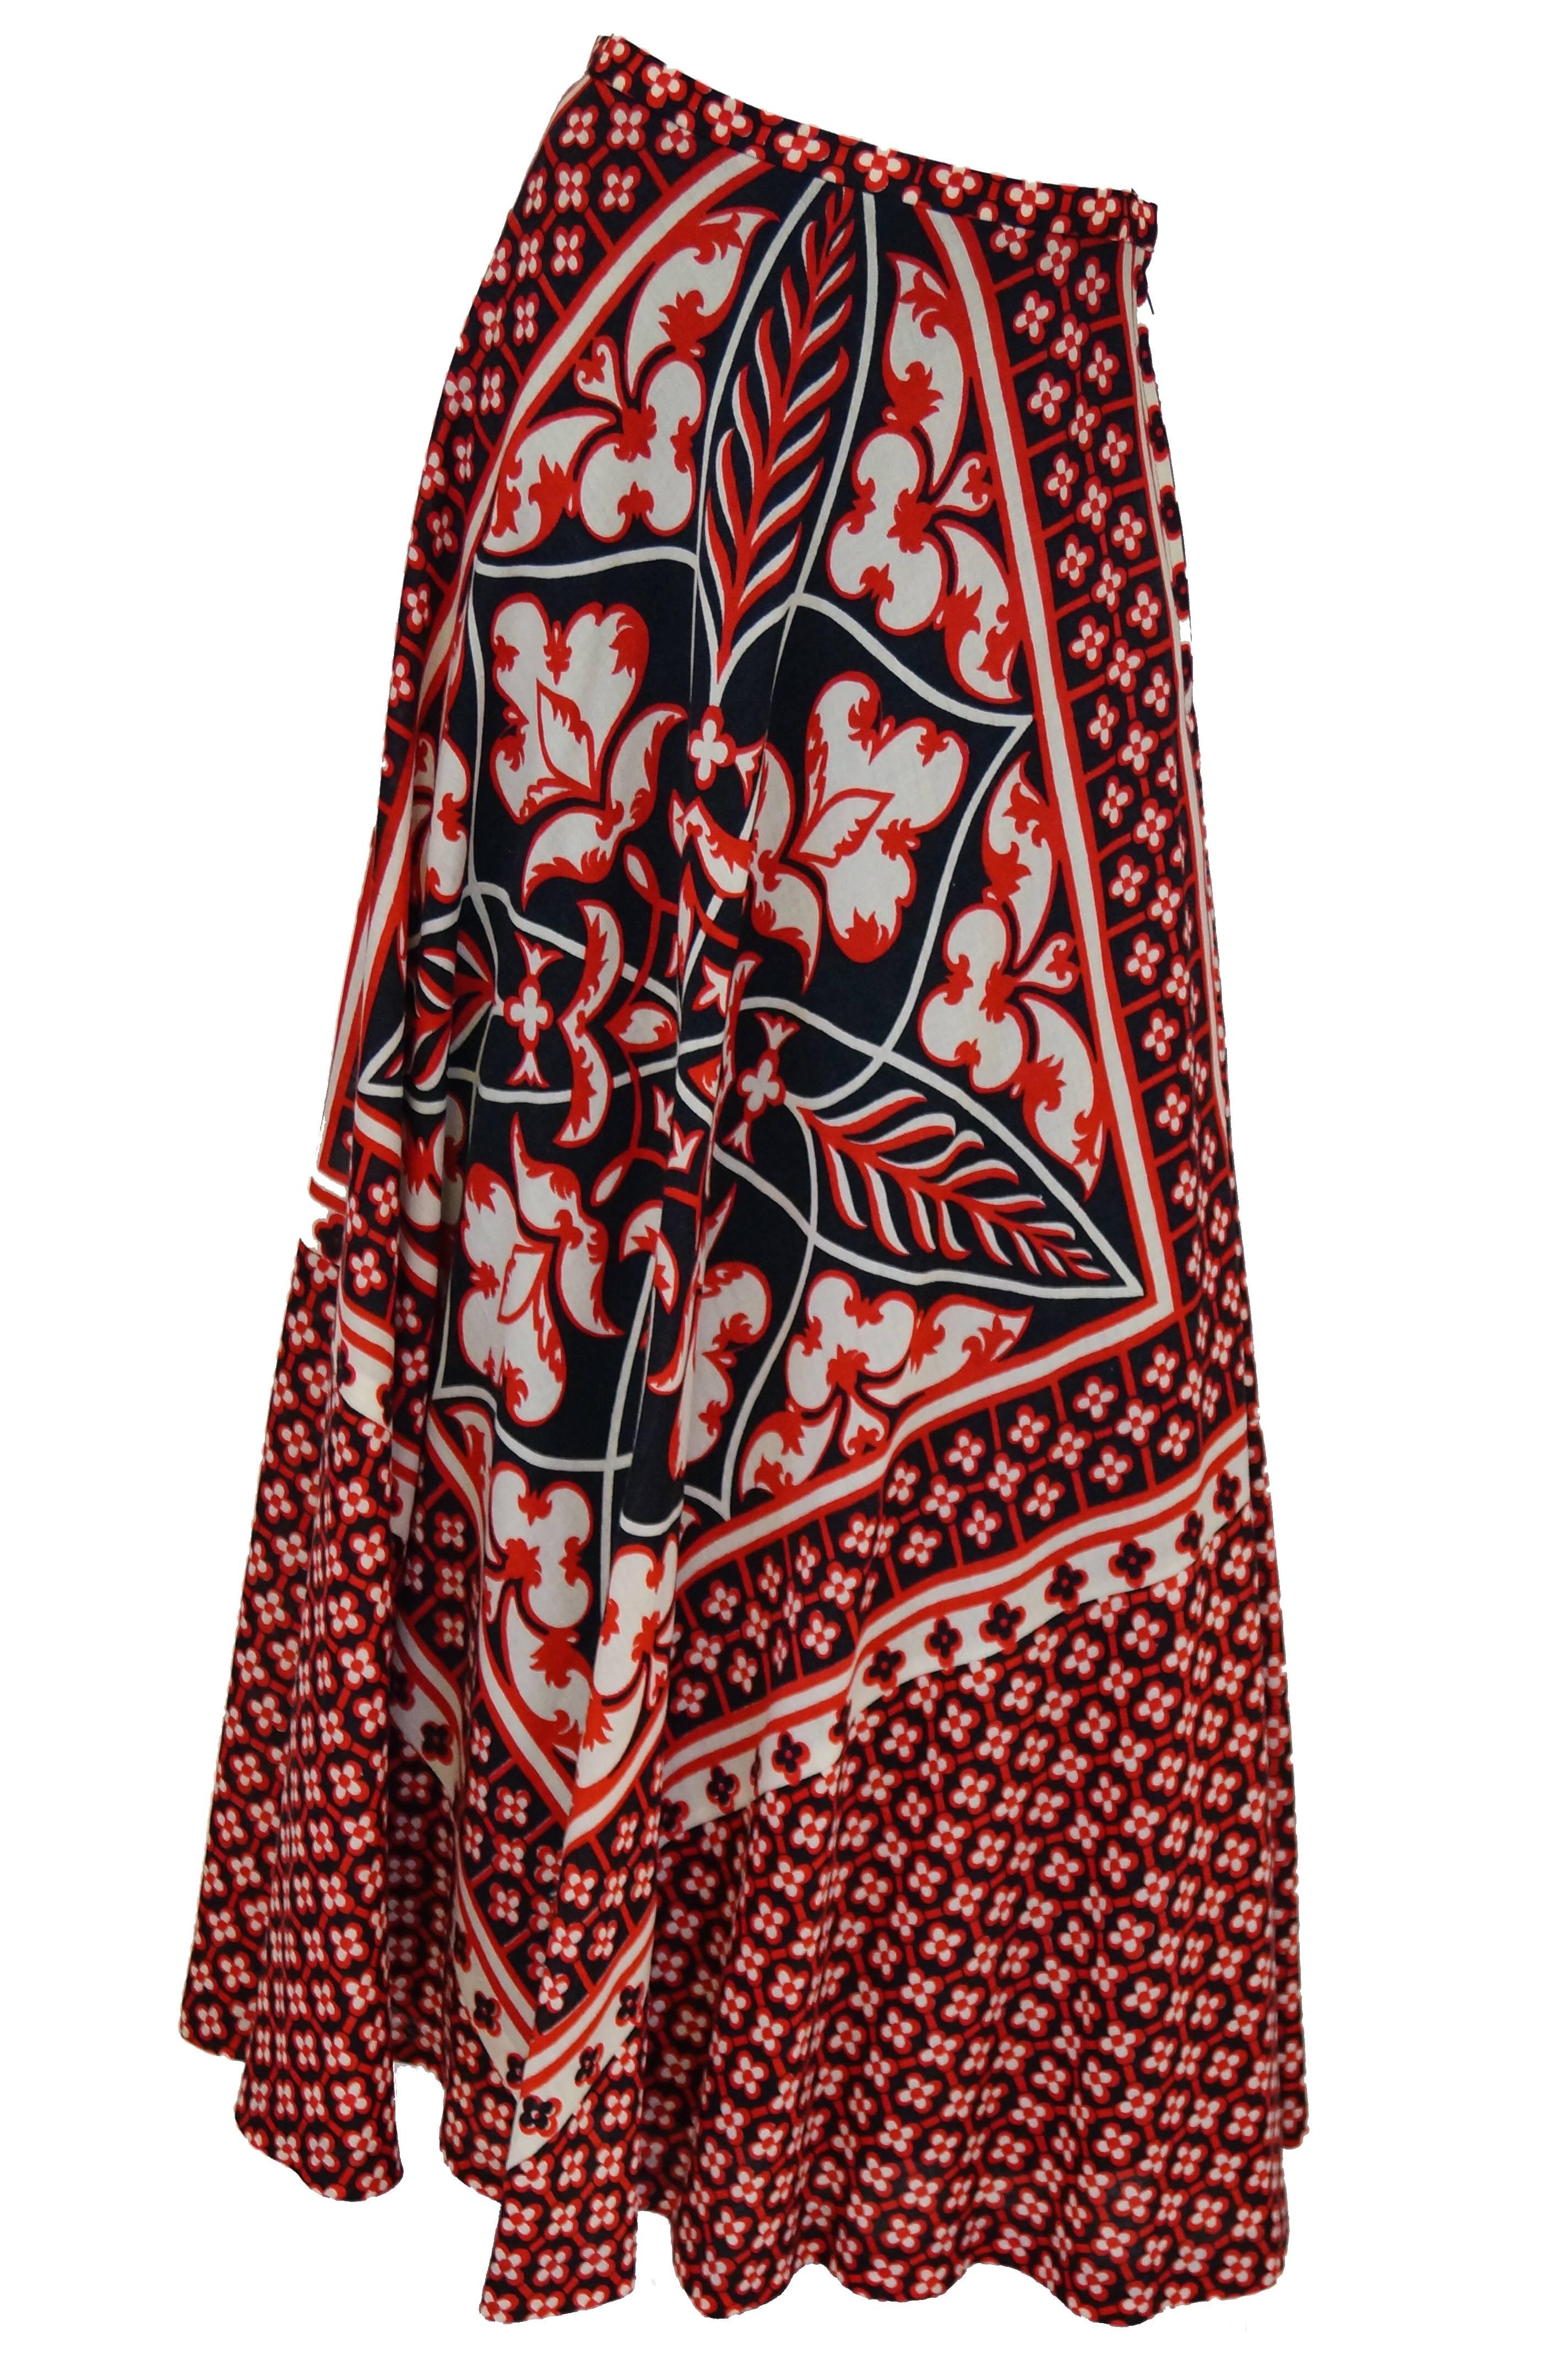 Red, black and white graphic print woven wool maxi skirt. The front of the skirt has a large placement print motif while the back is a symmetrical repeat pattern similar to the Dior flower print of the 60's. The wool fabric is woven and bias cut.